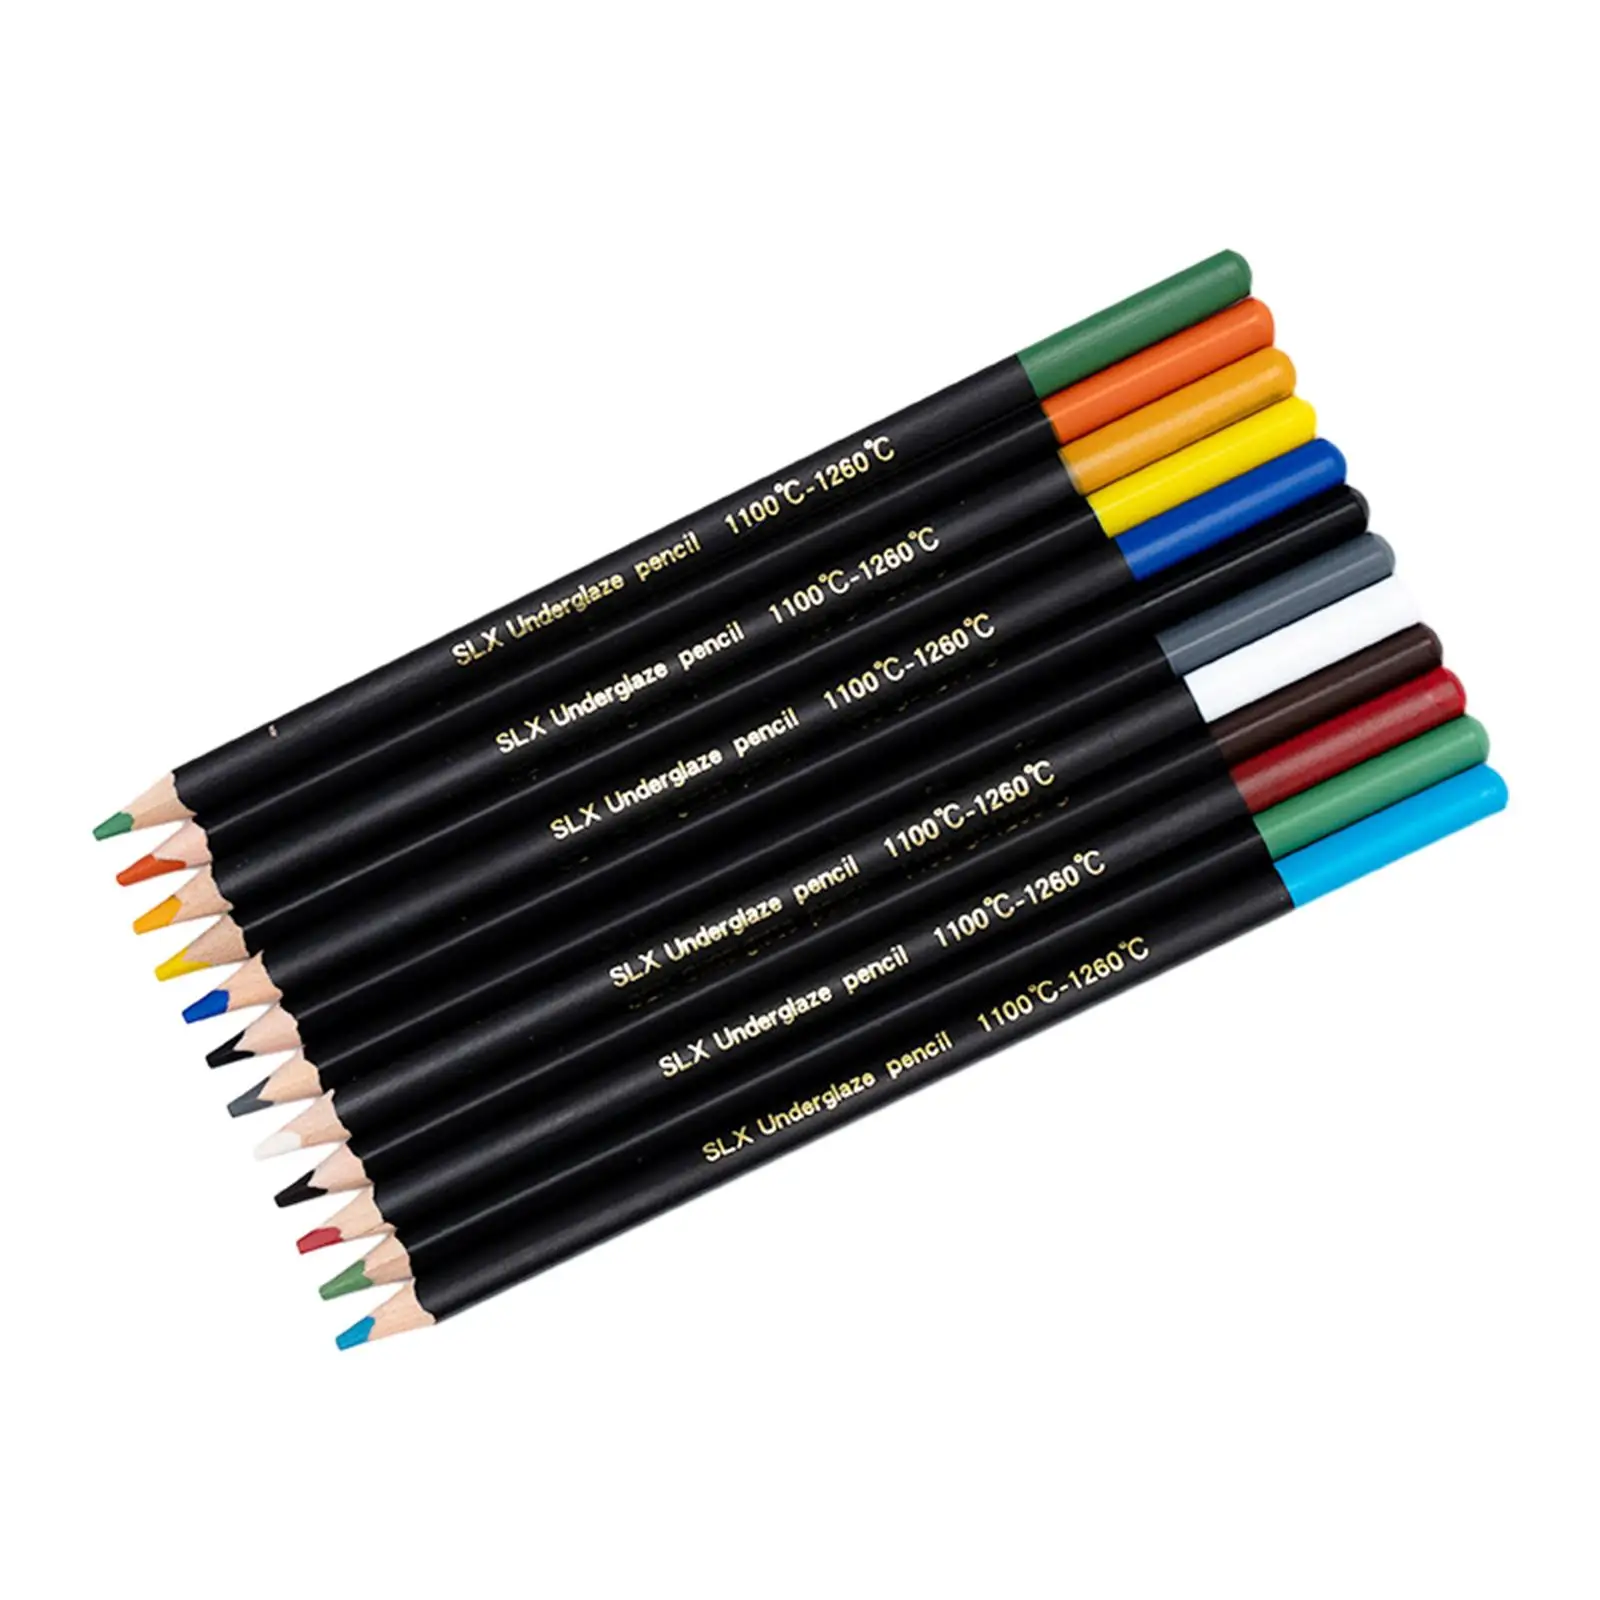 Colored Pencils 12 Colored Drawing Pencils Coloring Pencils Bulk for Art Supplies Artist Sketching Hand Painting Gift